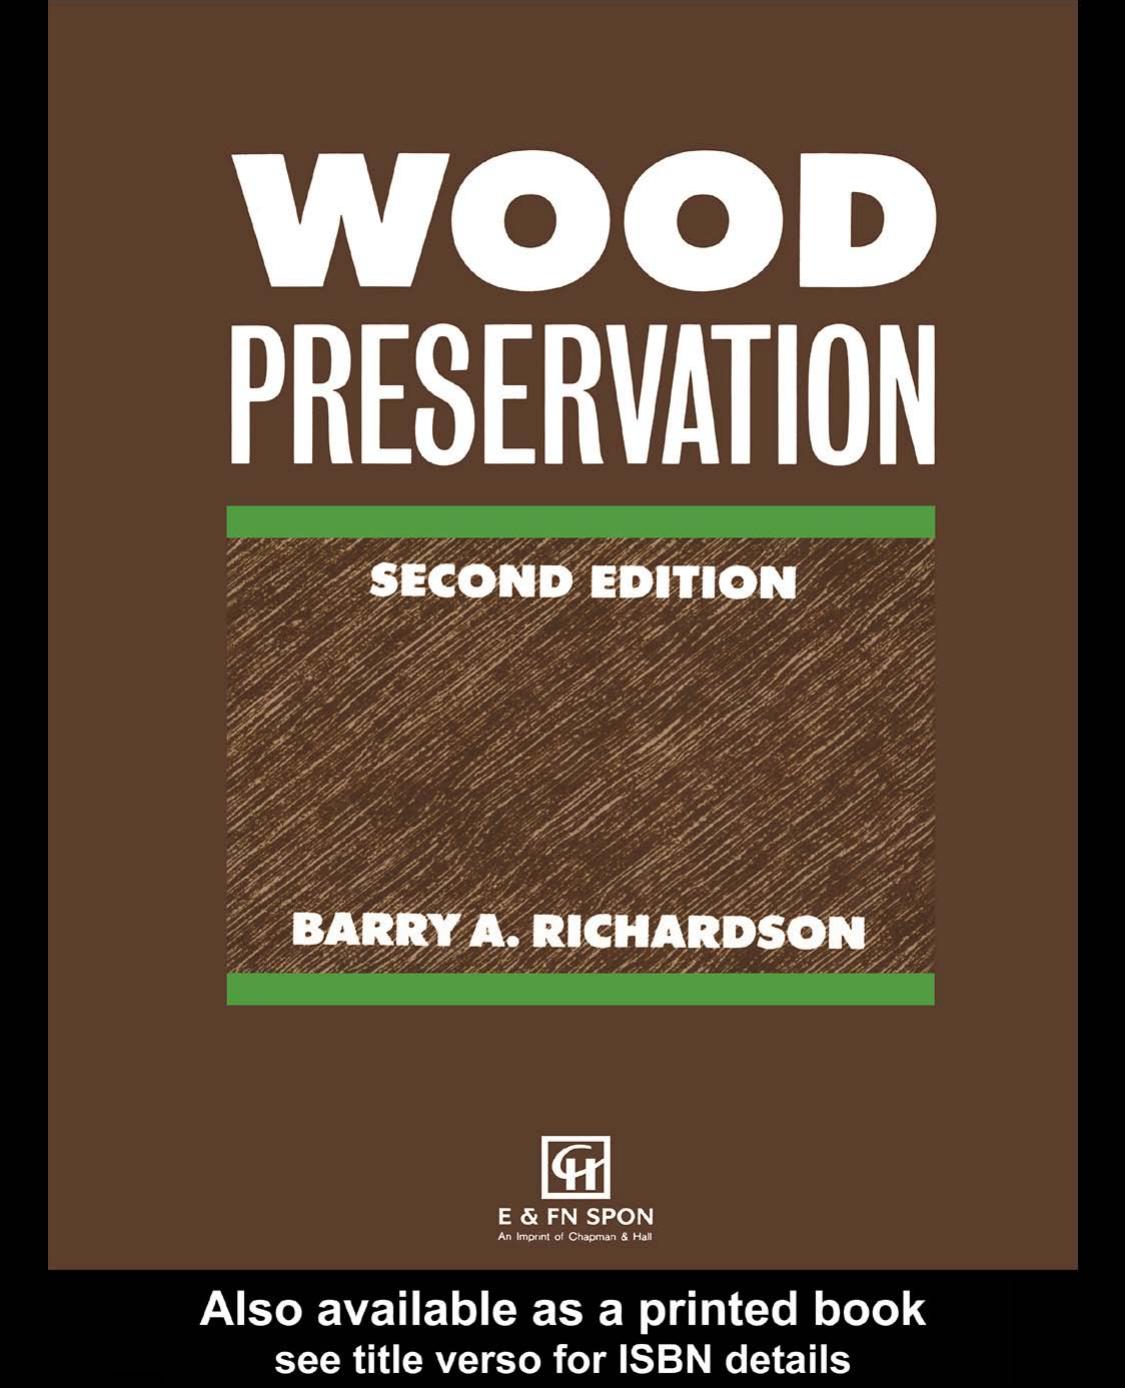 Wood Preservation, Second Edition